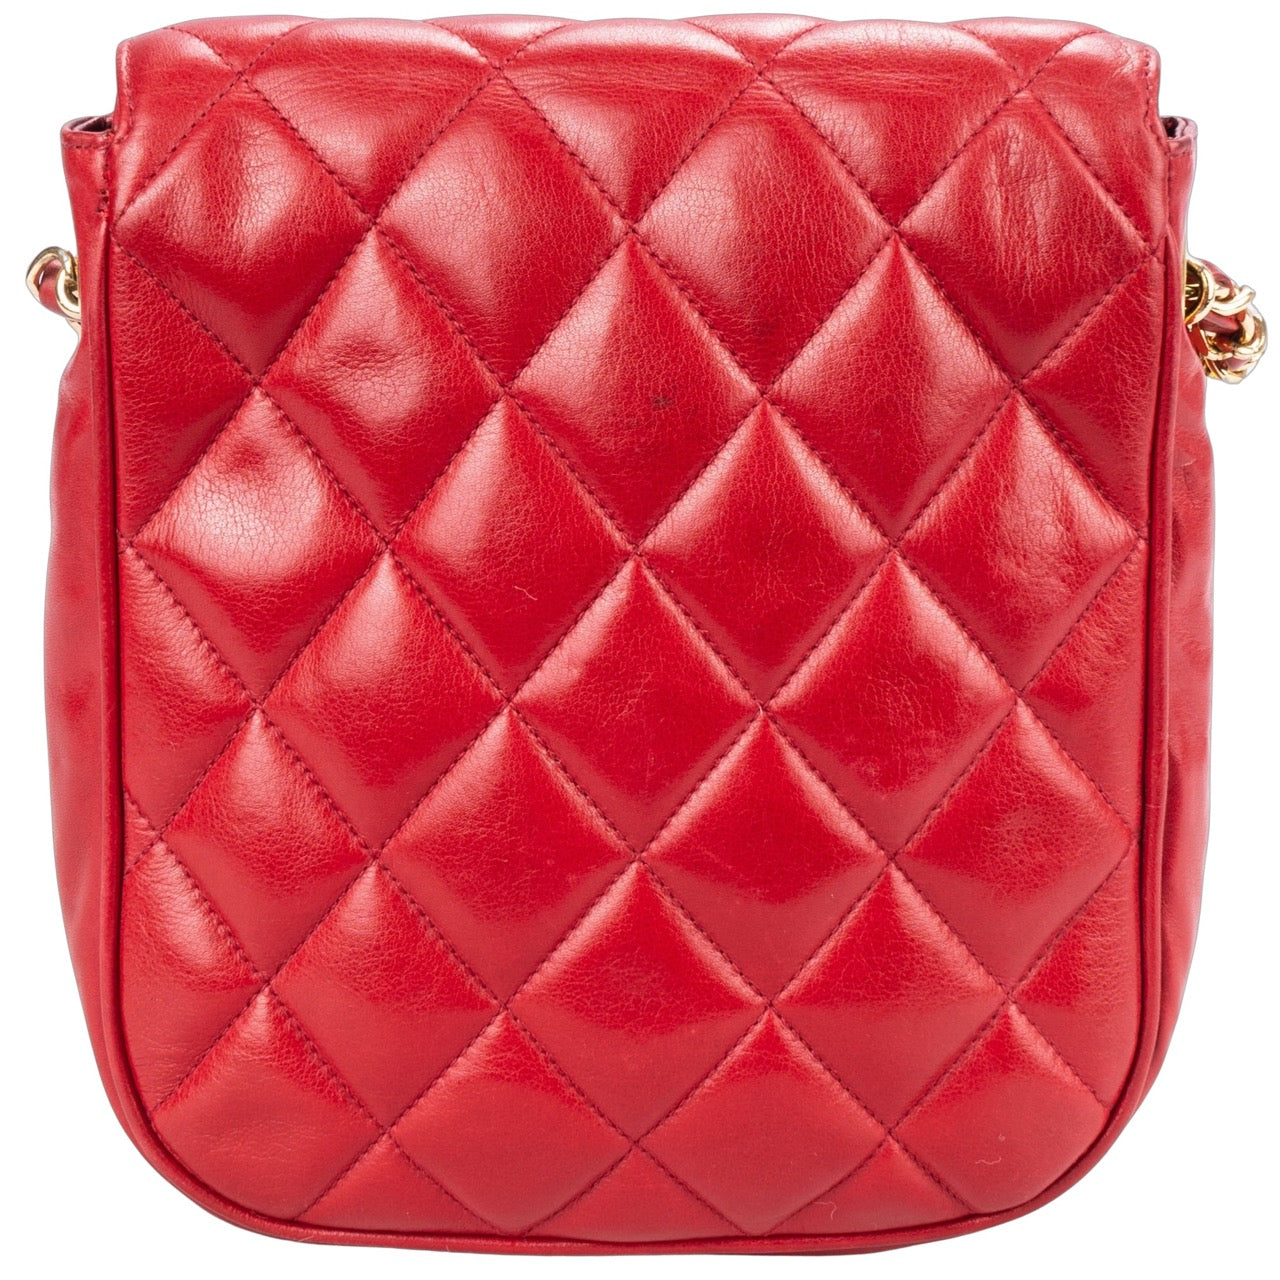 Chanel Quilted Lambskin 24K Mini Single Flap Bag